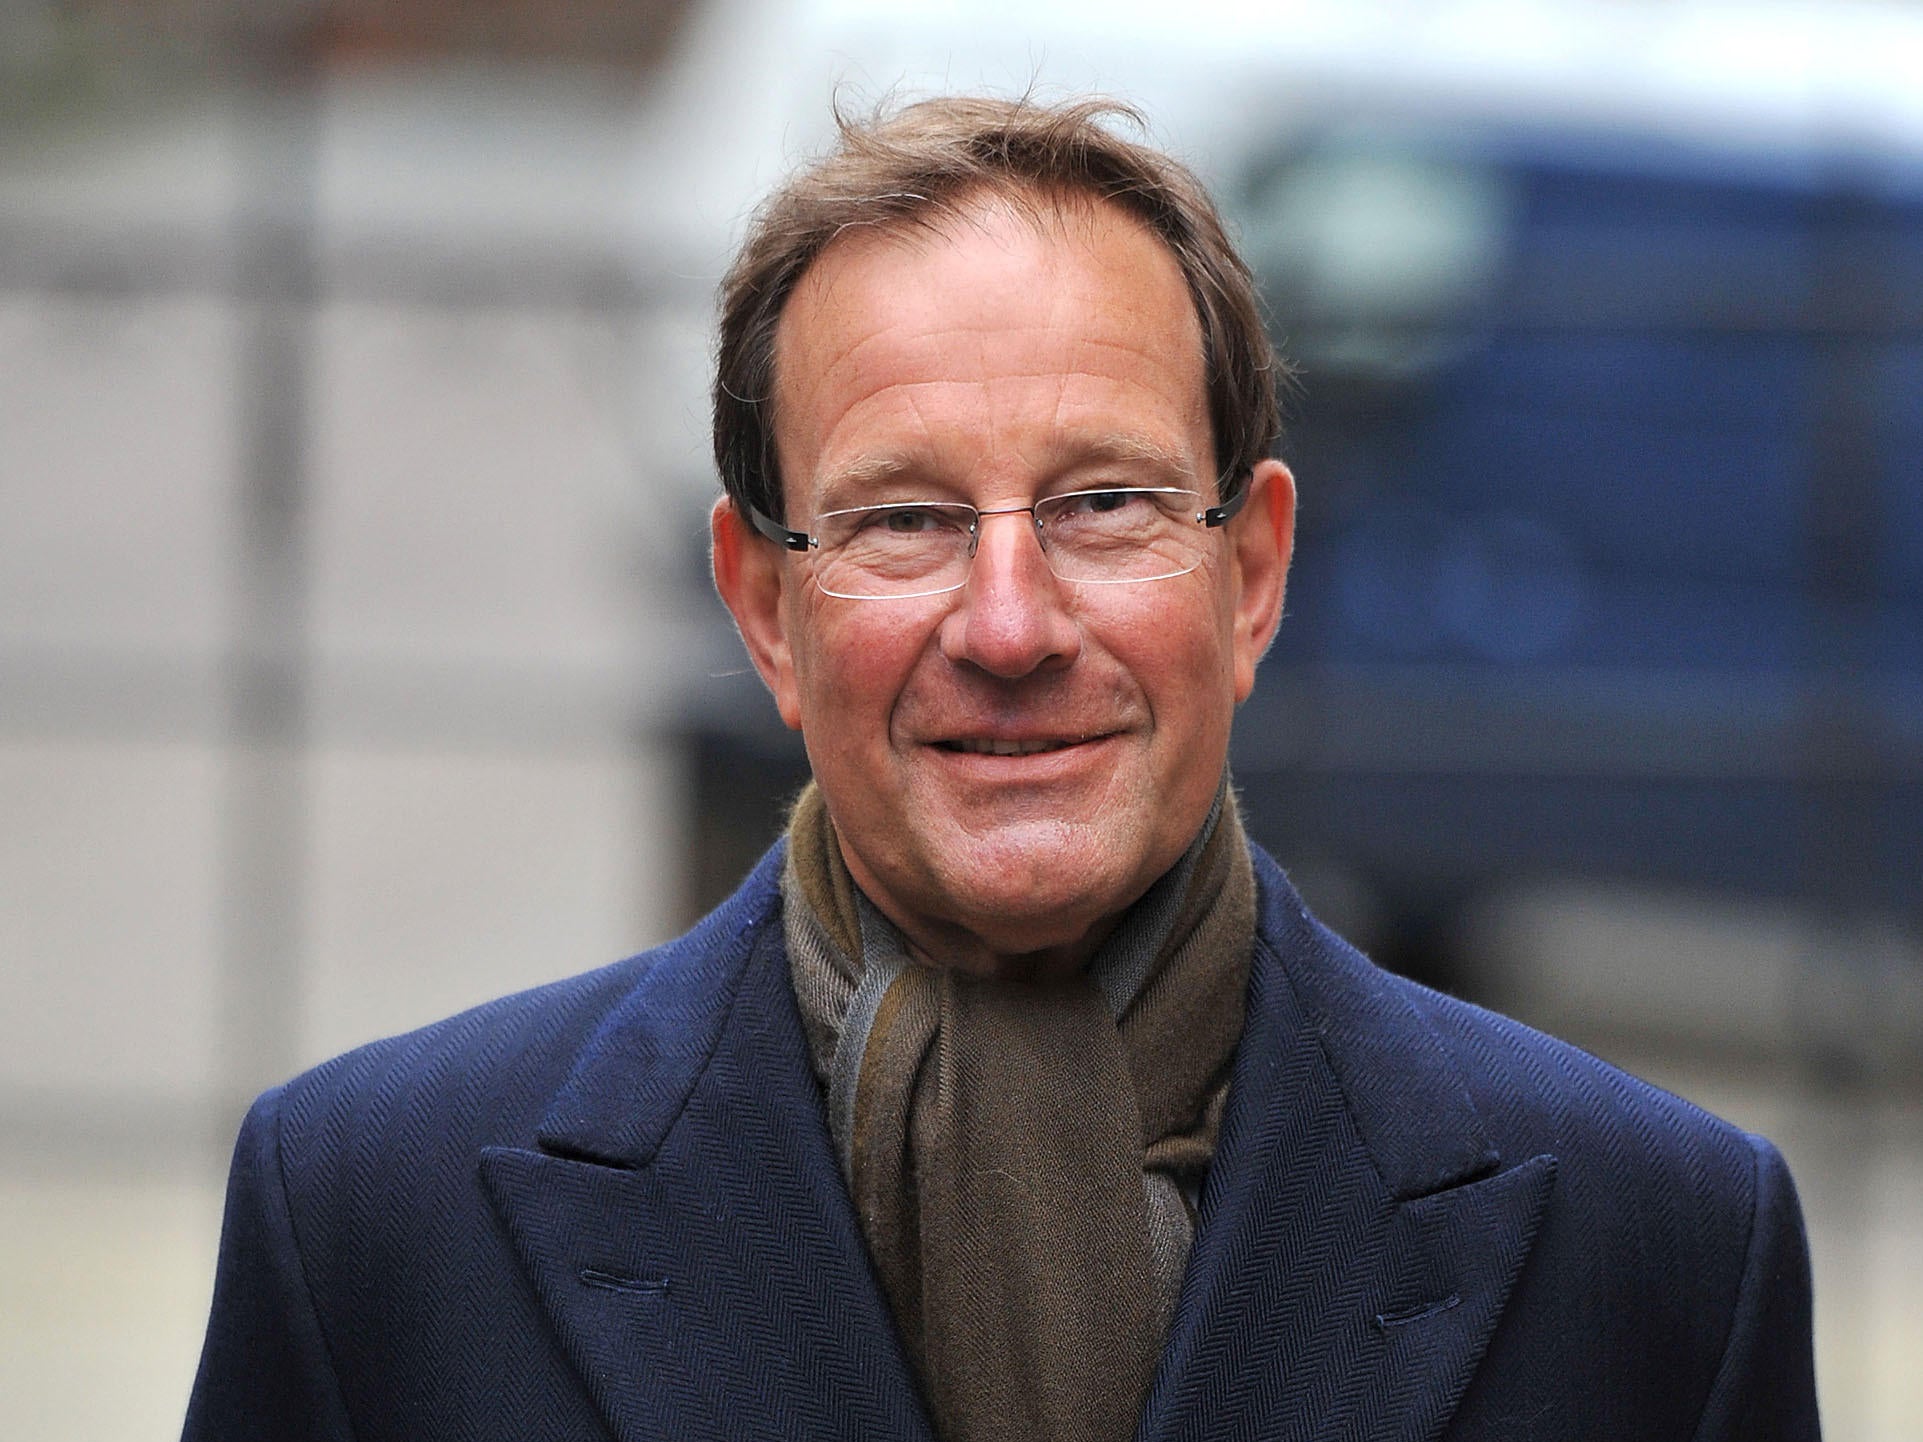 Former owner of the ‘Daily Express’, Richard Desmond